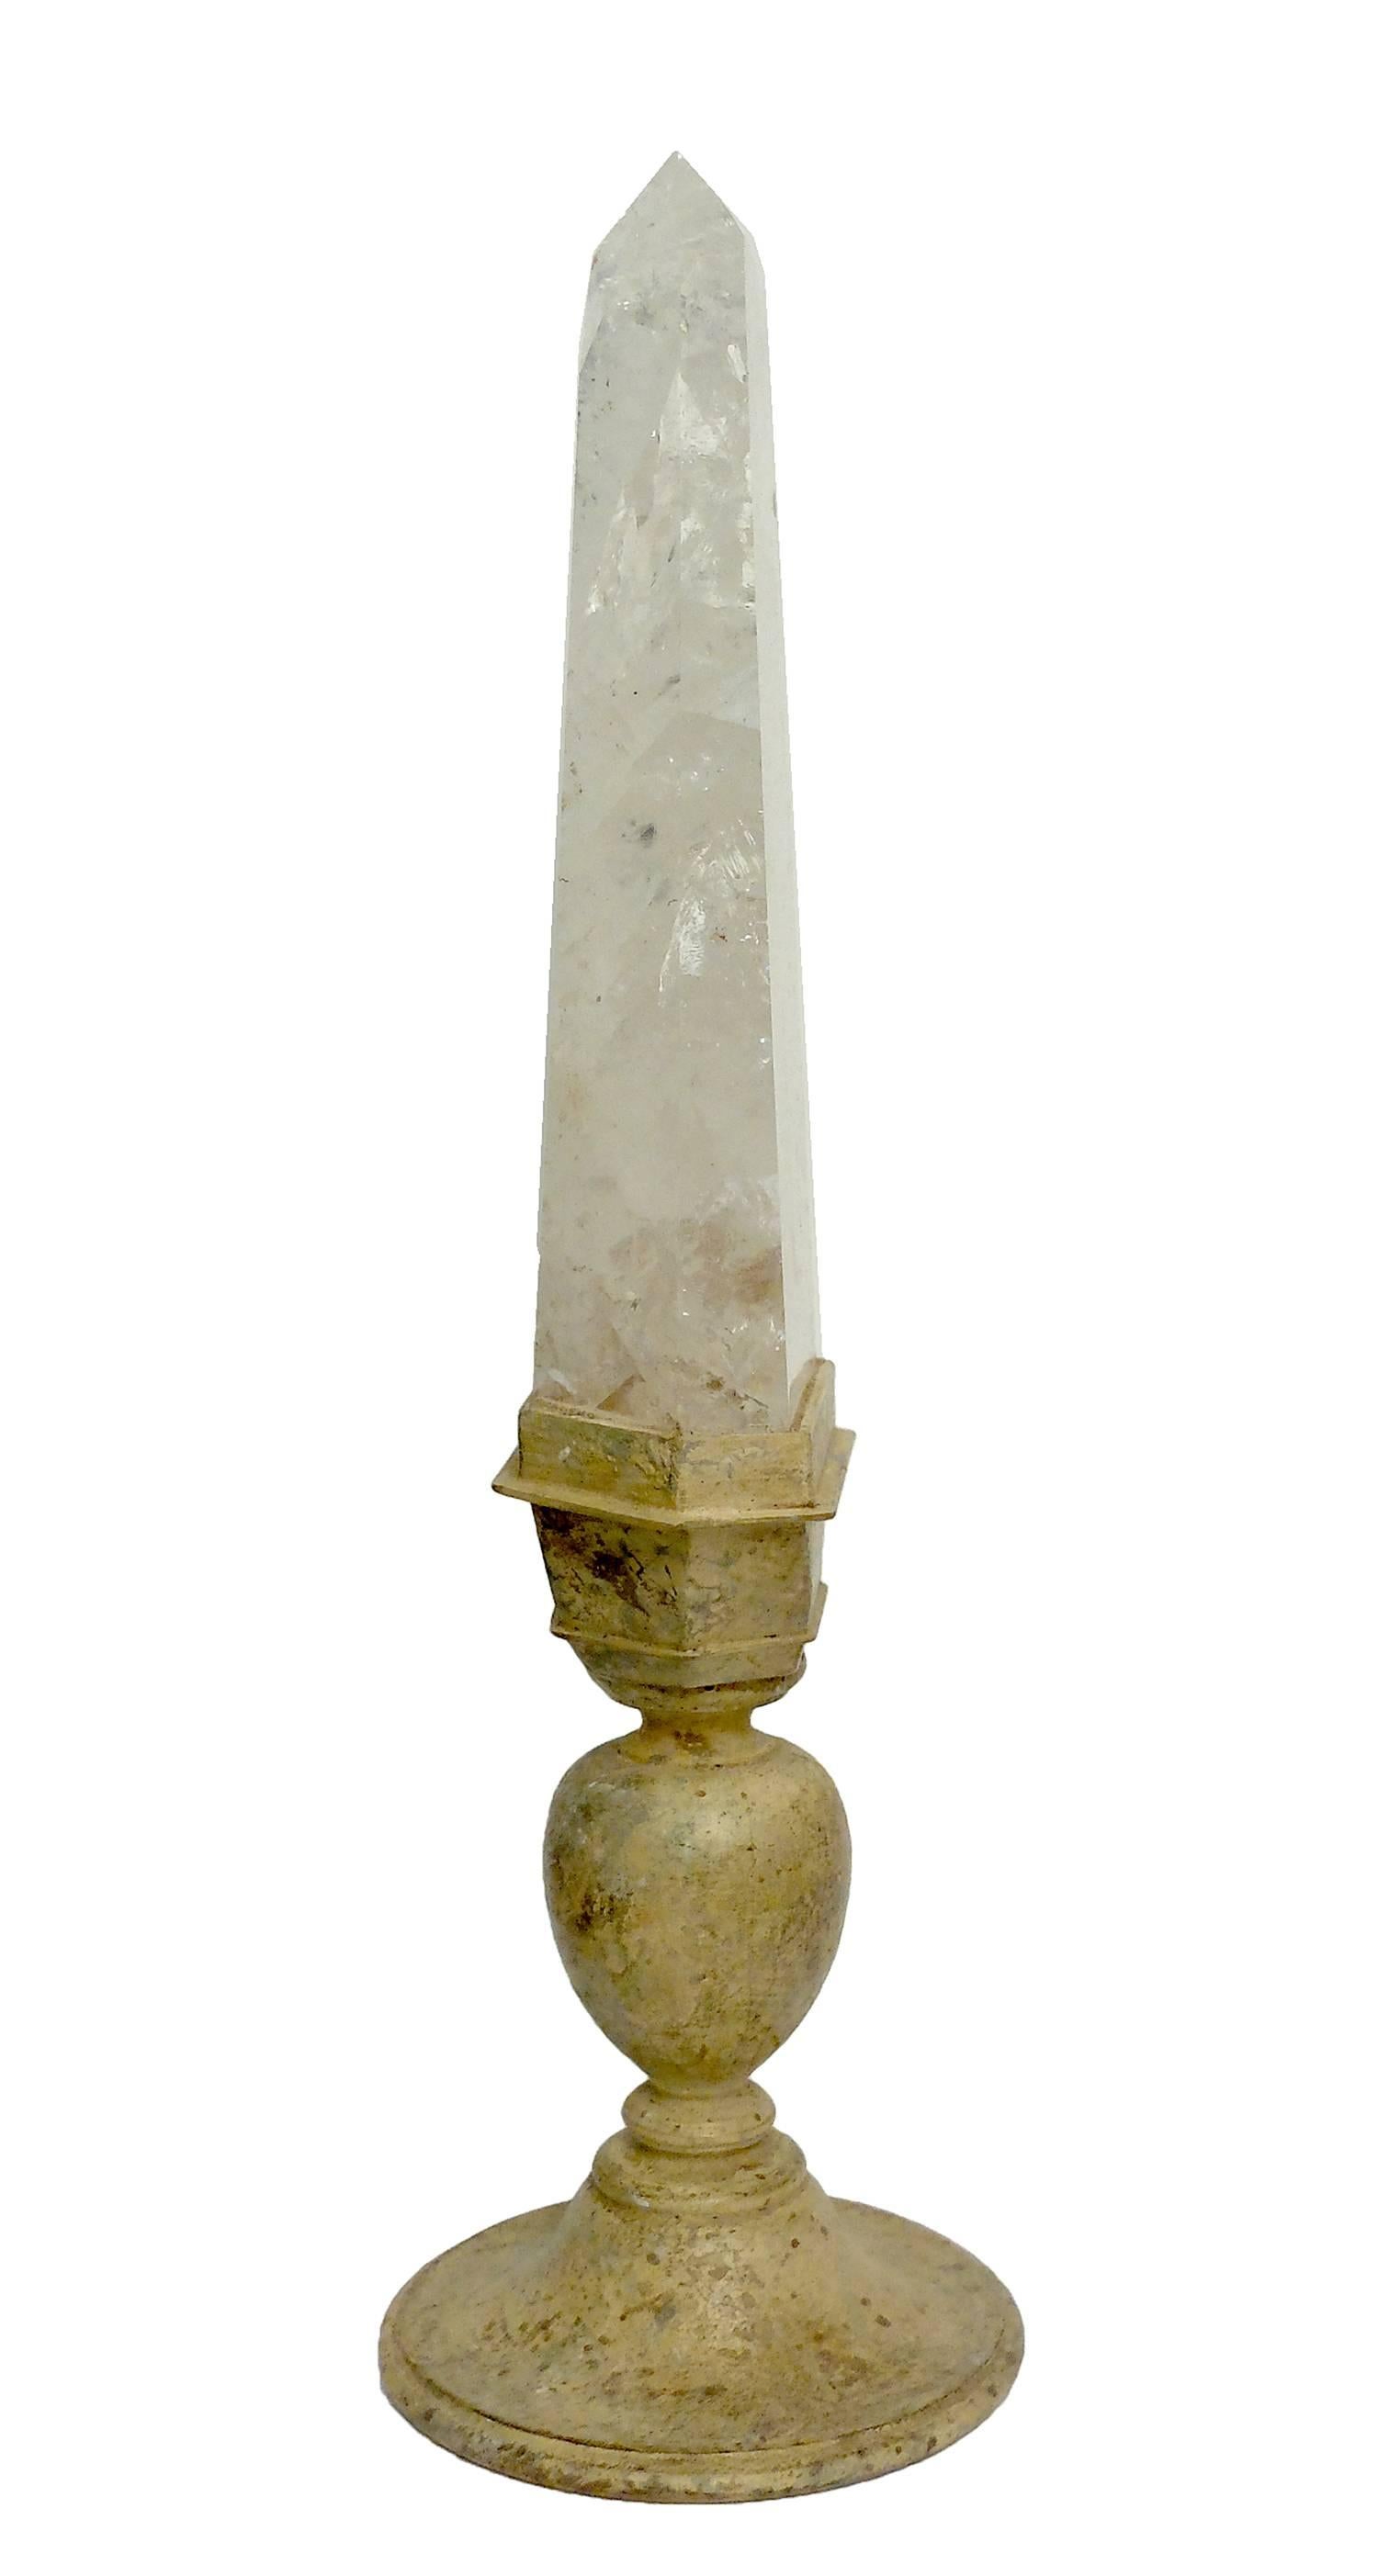 A Naturalia mineral specimen of an impressive unusually huge sized, big rock crystal quartz. It shows a wooden lacquered base beje color vase-shaped cup, Italy, circa 1880.